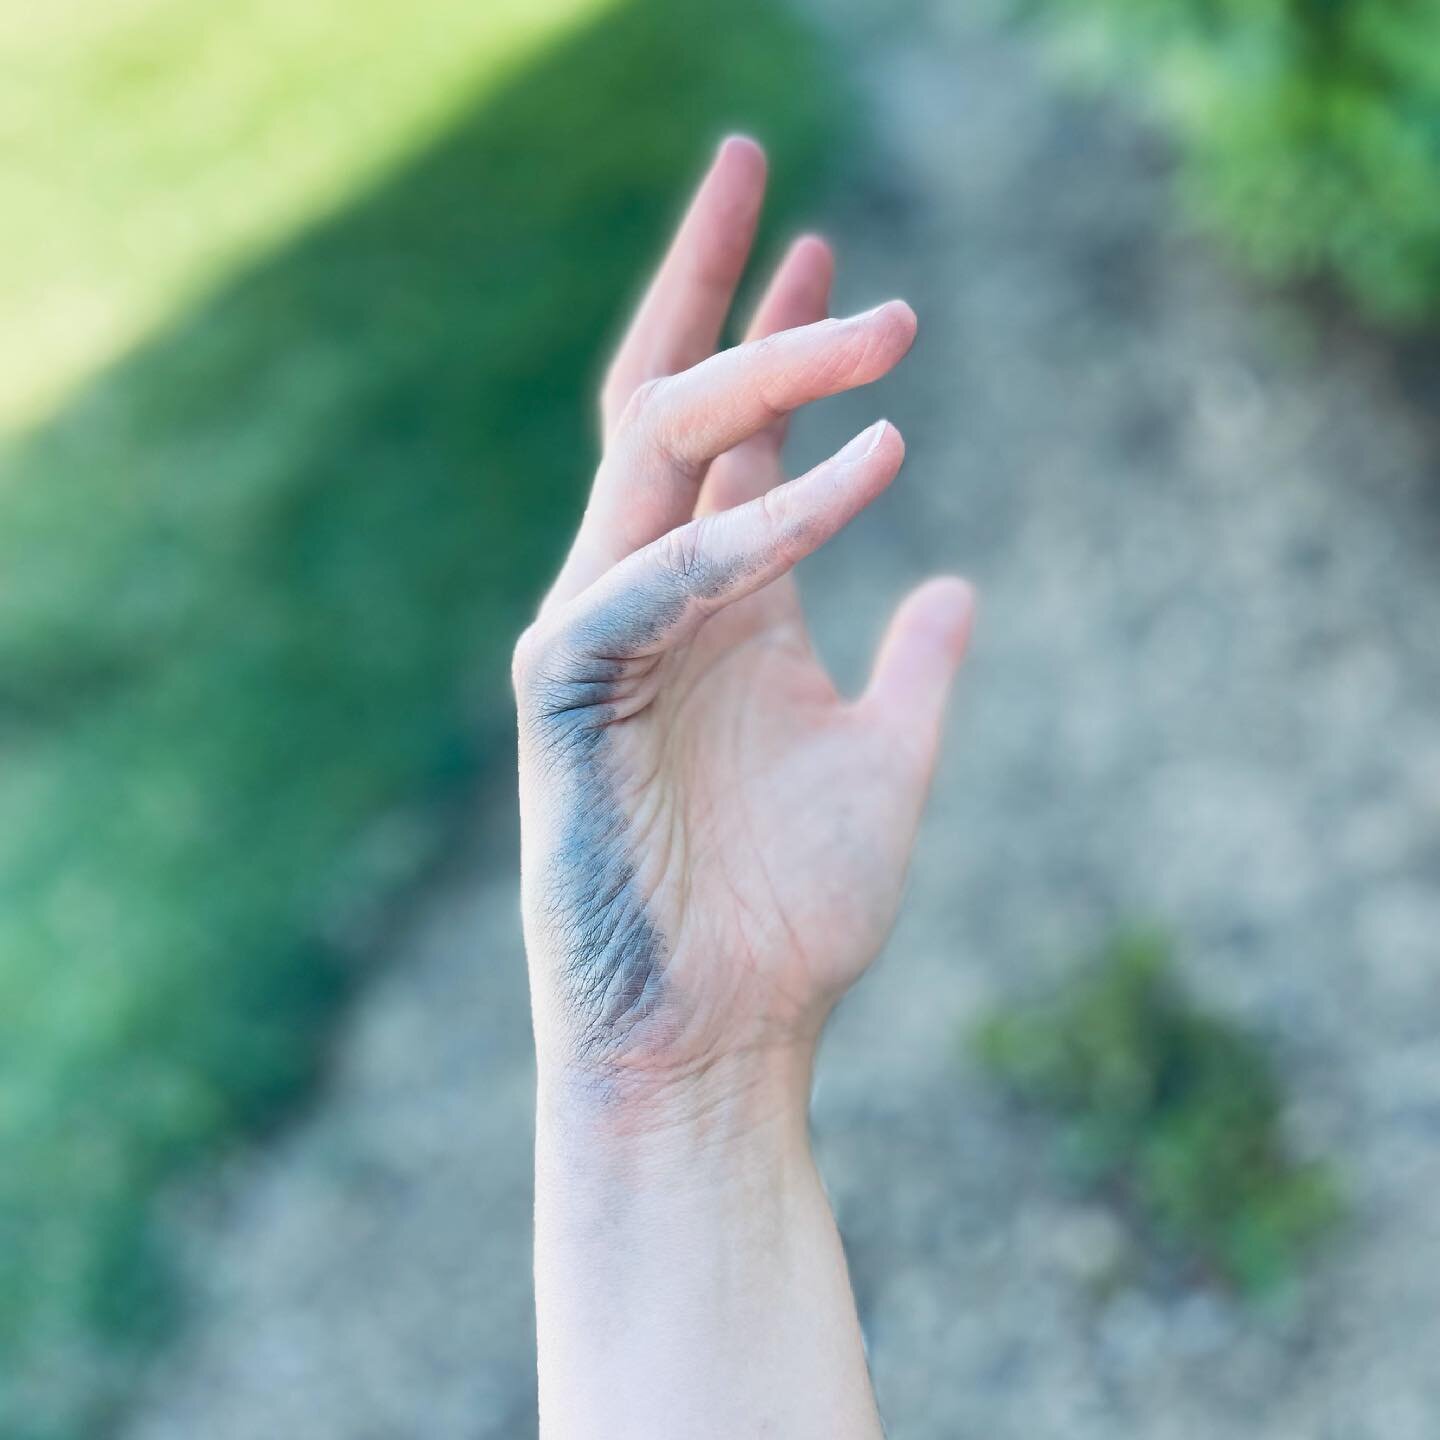 Hand covered in graphite &mdash; the sign of a perfect hour spent drawing in the summer shade.